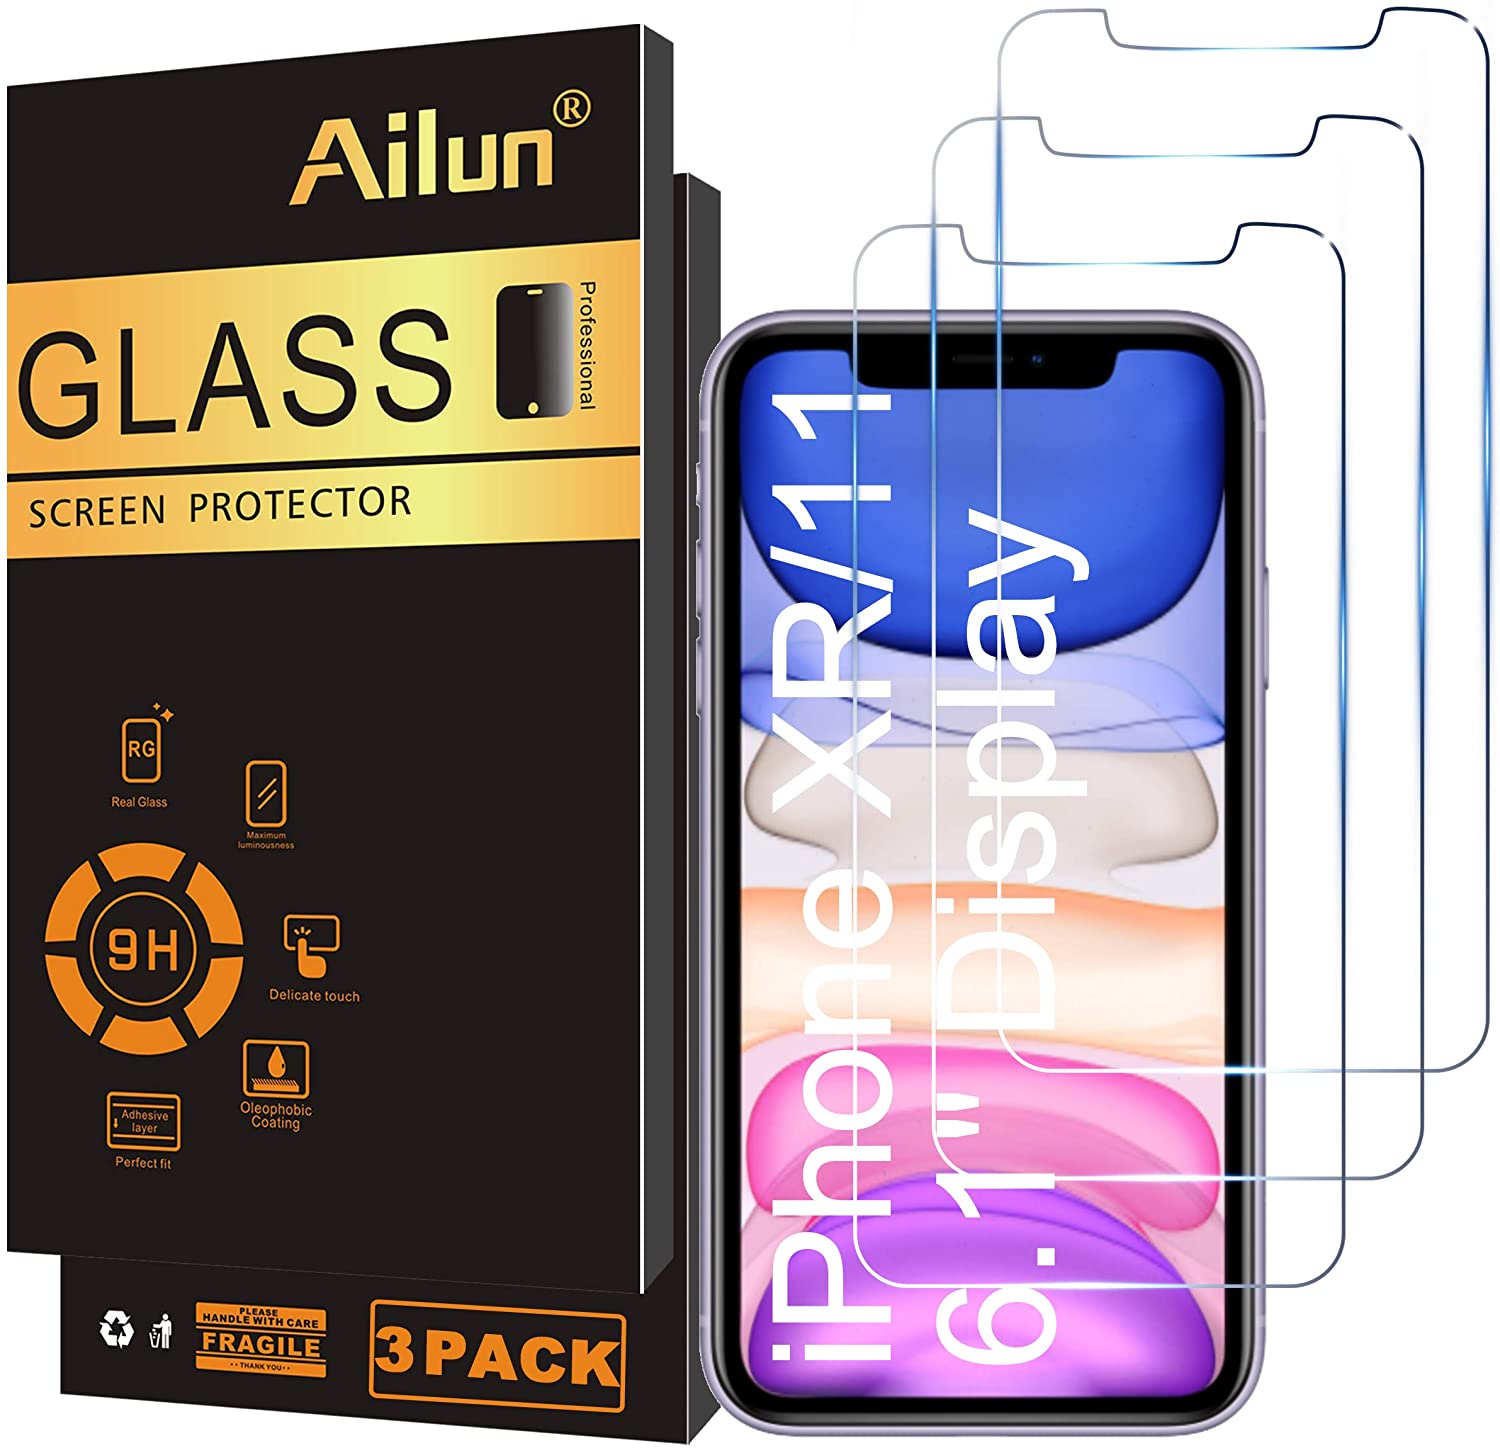 Best Cellphone Screen Protectors for Home, Work and Travel